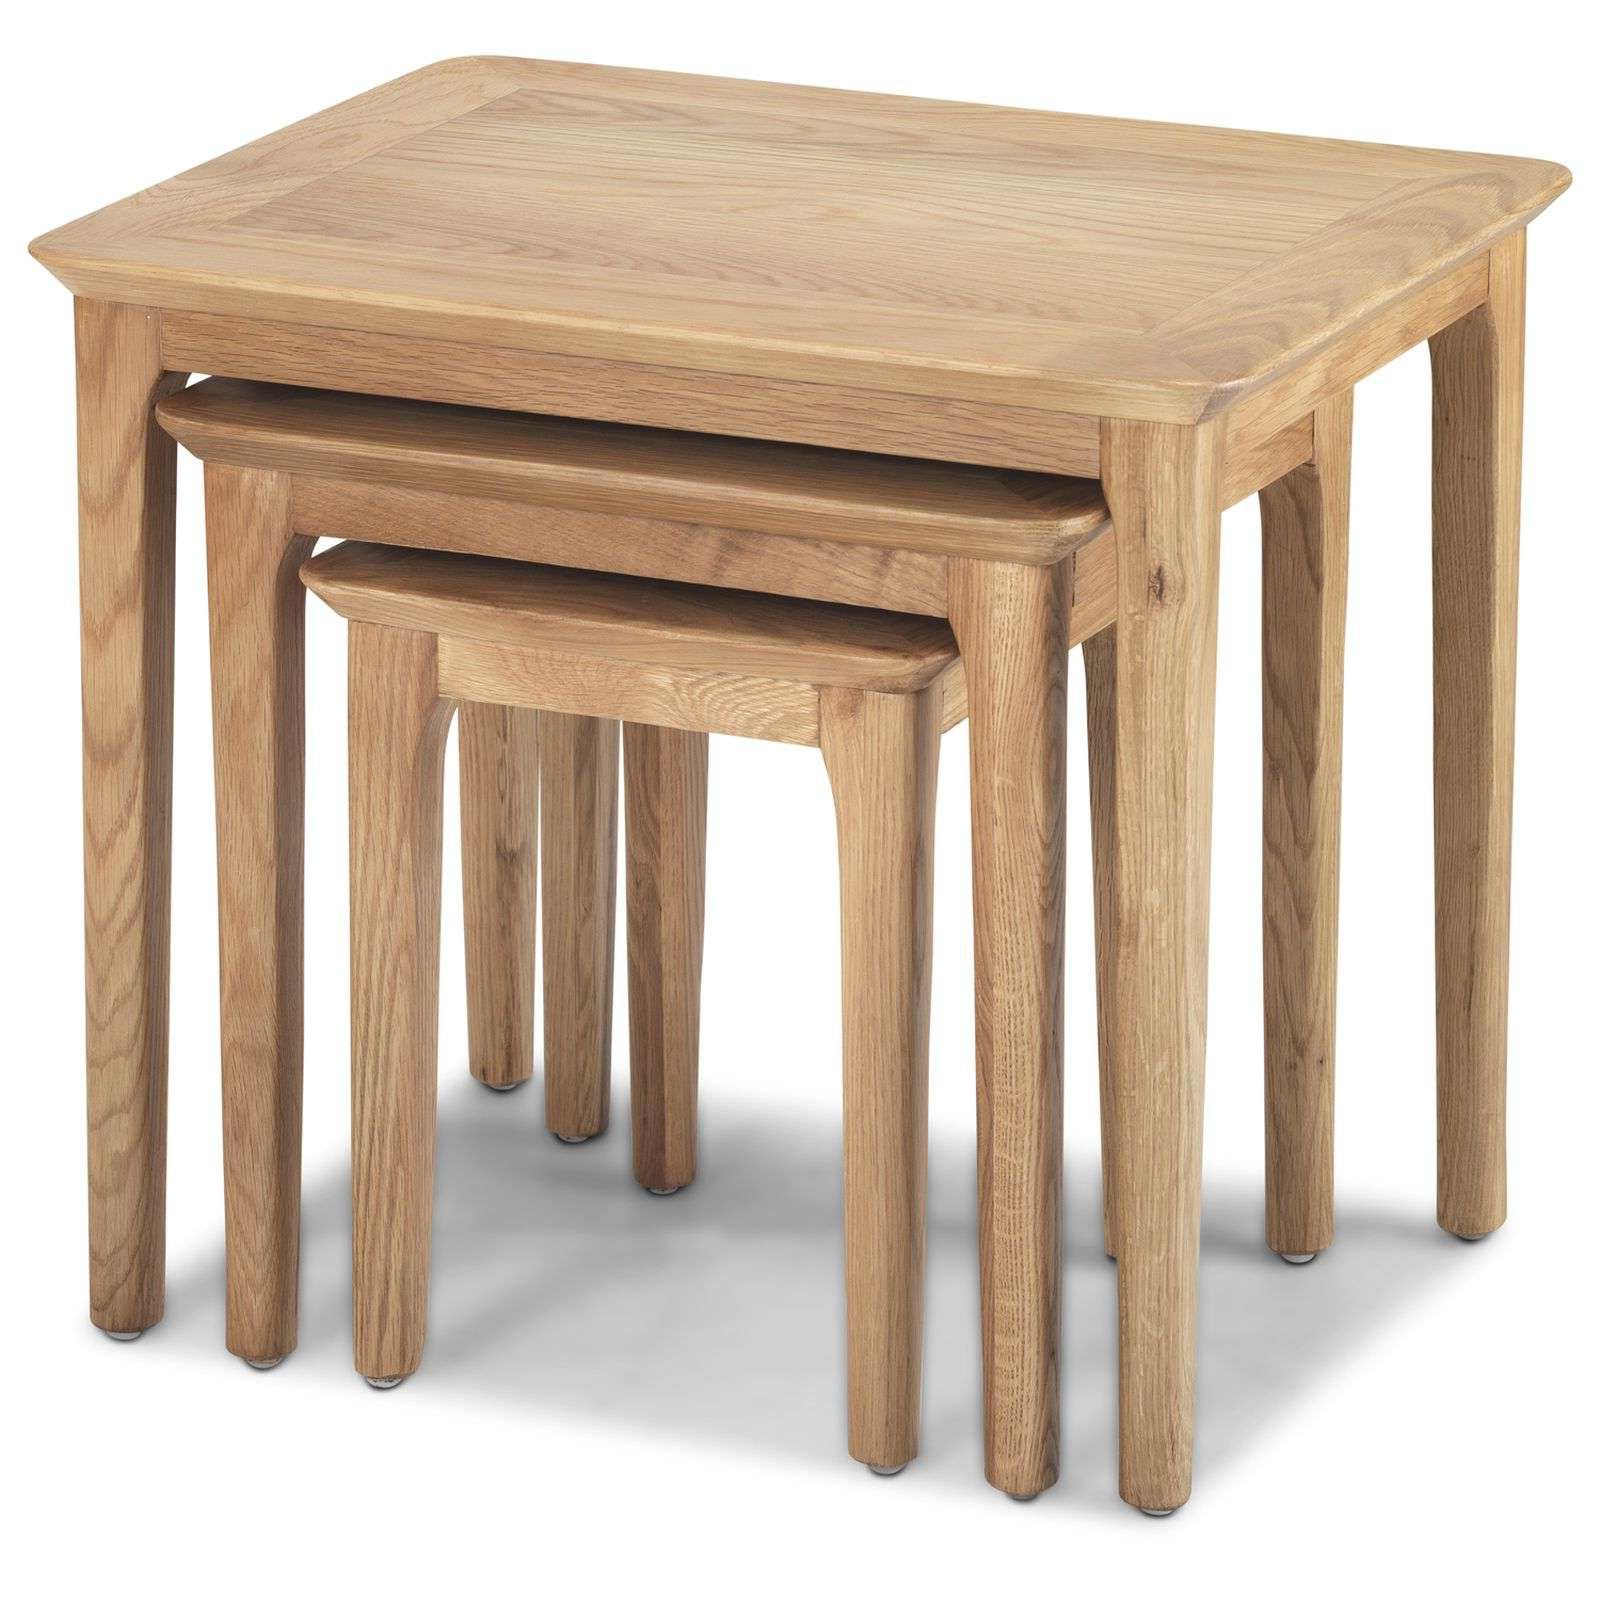 Coffee Tables Of 3 Nesting Tables Intended For Well Known Telford Solid Oak Nest Of Three Coffee Tables – Discount (View 12 of 15)